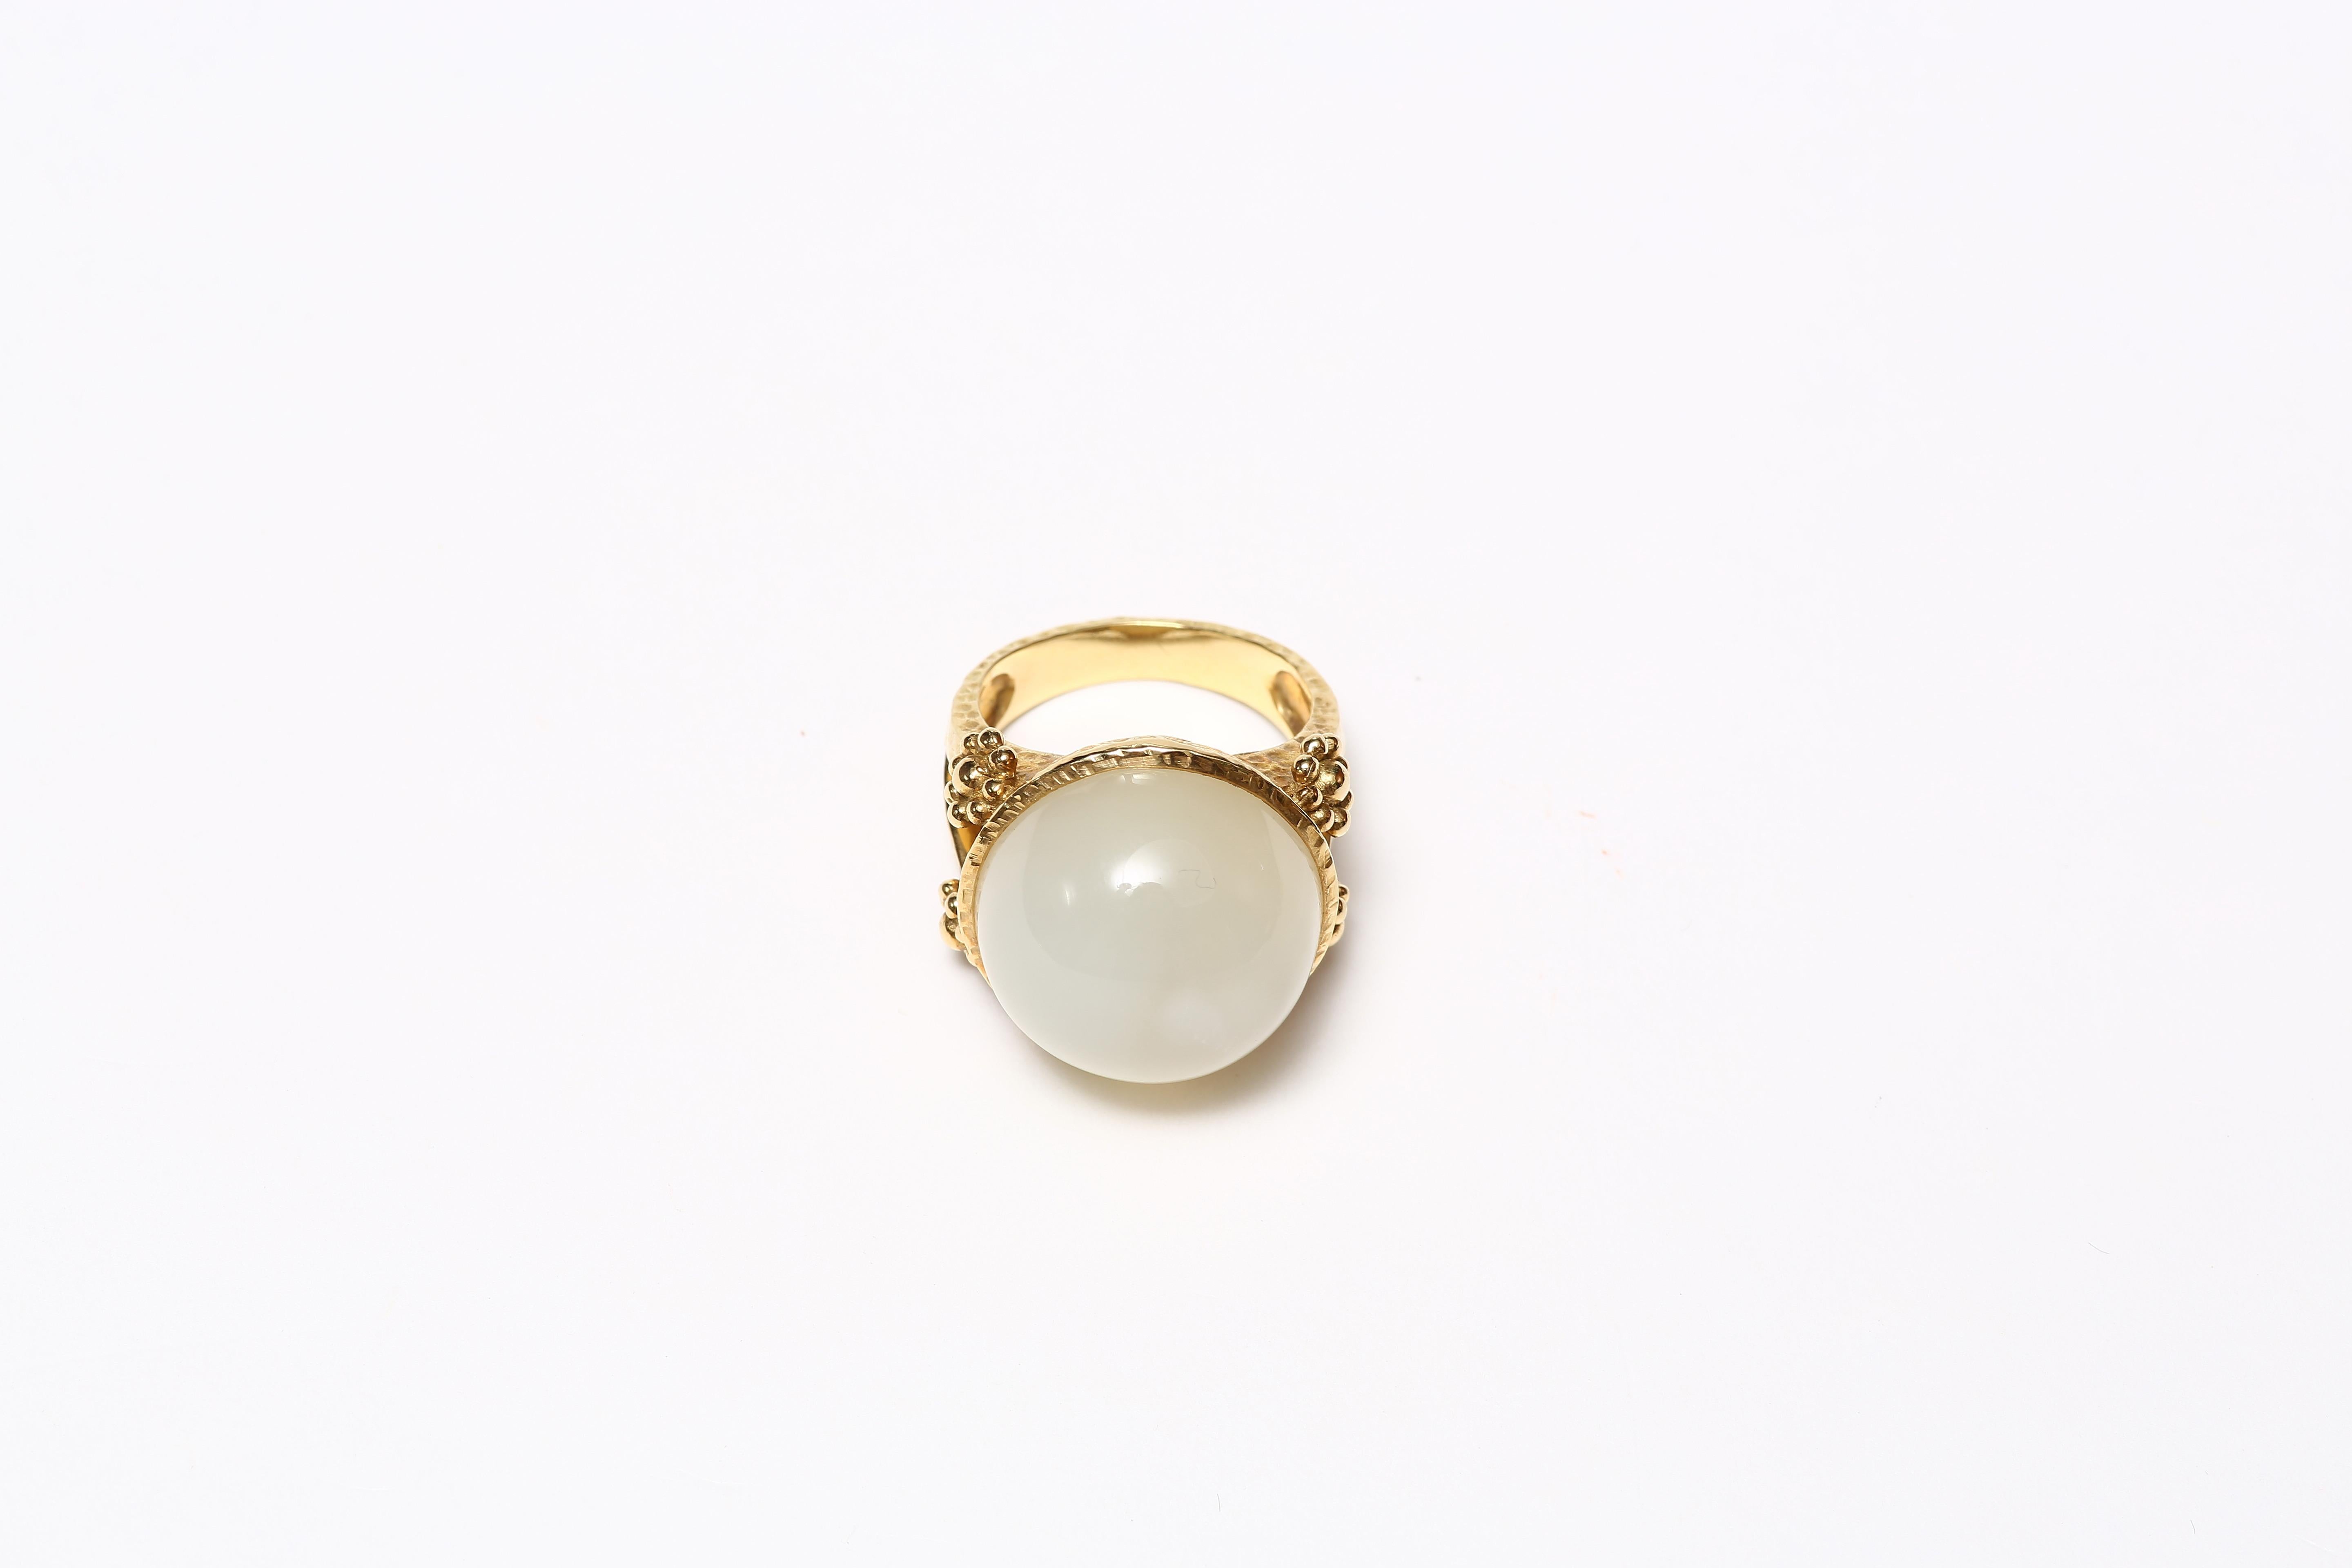 A fabulous ring with a fine large round cabochon moonstone set in solid 18 karat gold with double floral motif on either side .  
US size: 7.5
Interior: 1.7cm dia

Designed by AMANDA CLARK for Altfield, our collection focuses on natures most lovely